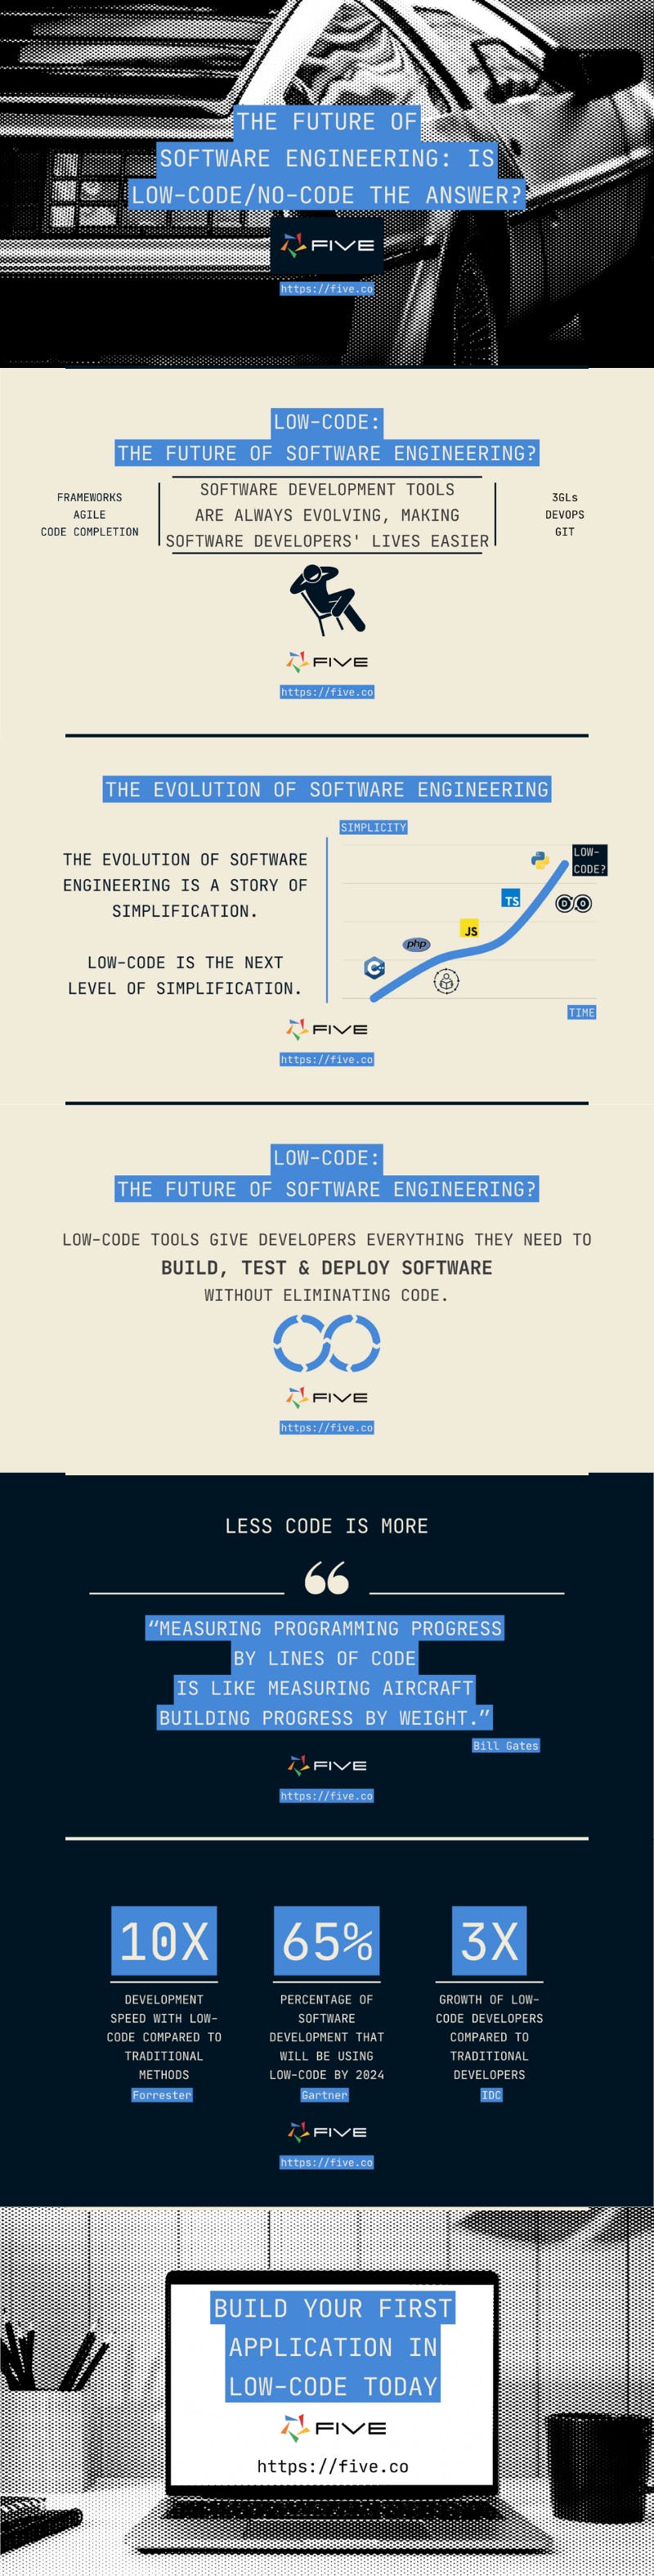 Five.Co - The Future Of Software Engineering Is Low-Code The Answer Infographic.png